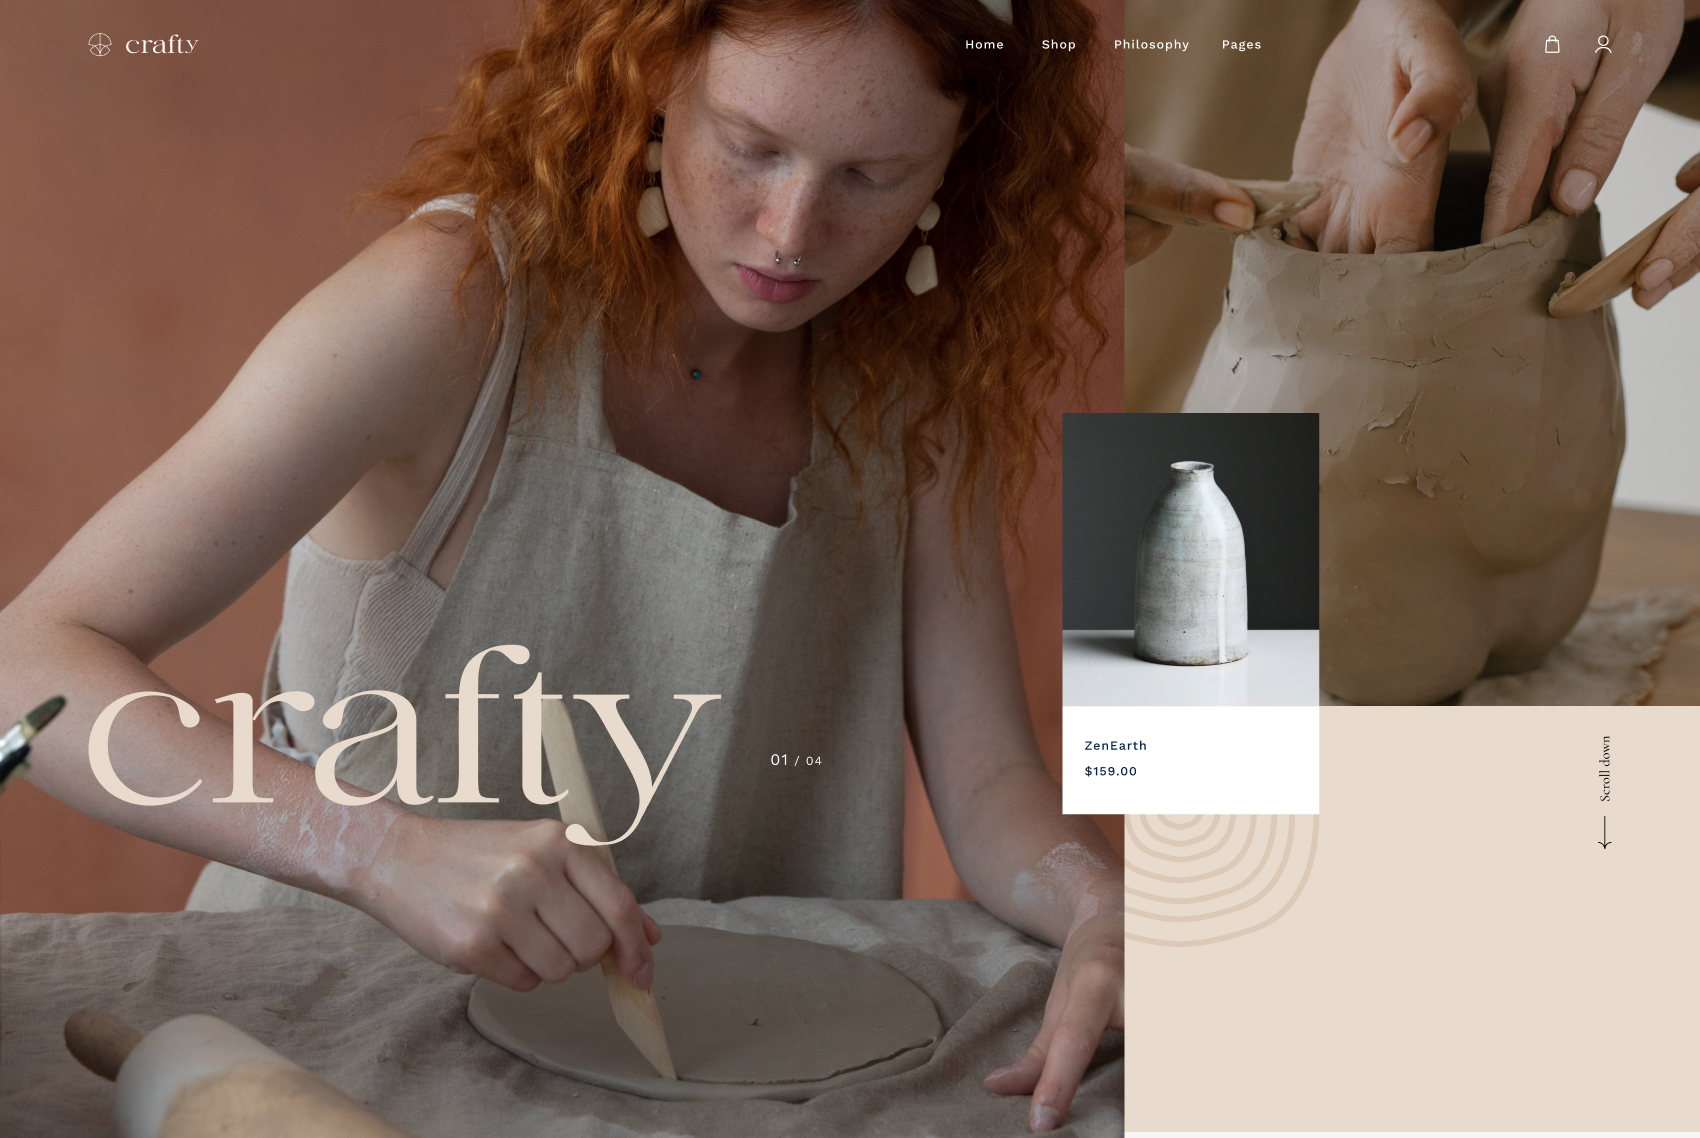 Crafty Joomla template homepage showcasing an artistic craft shop with integrated online store features.